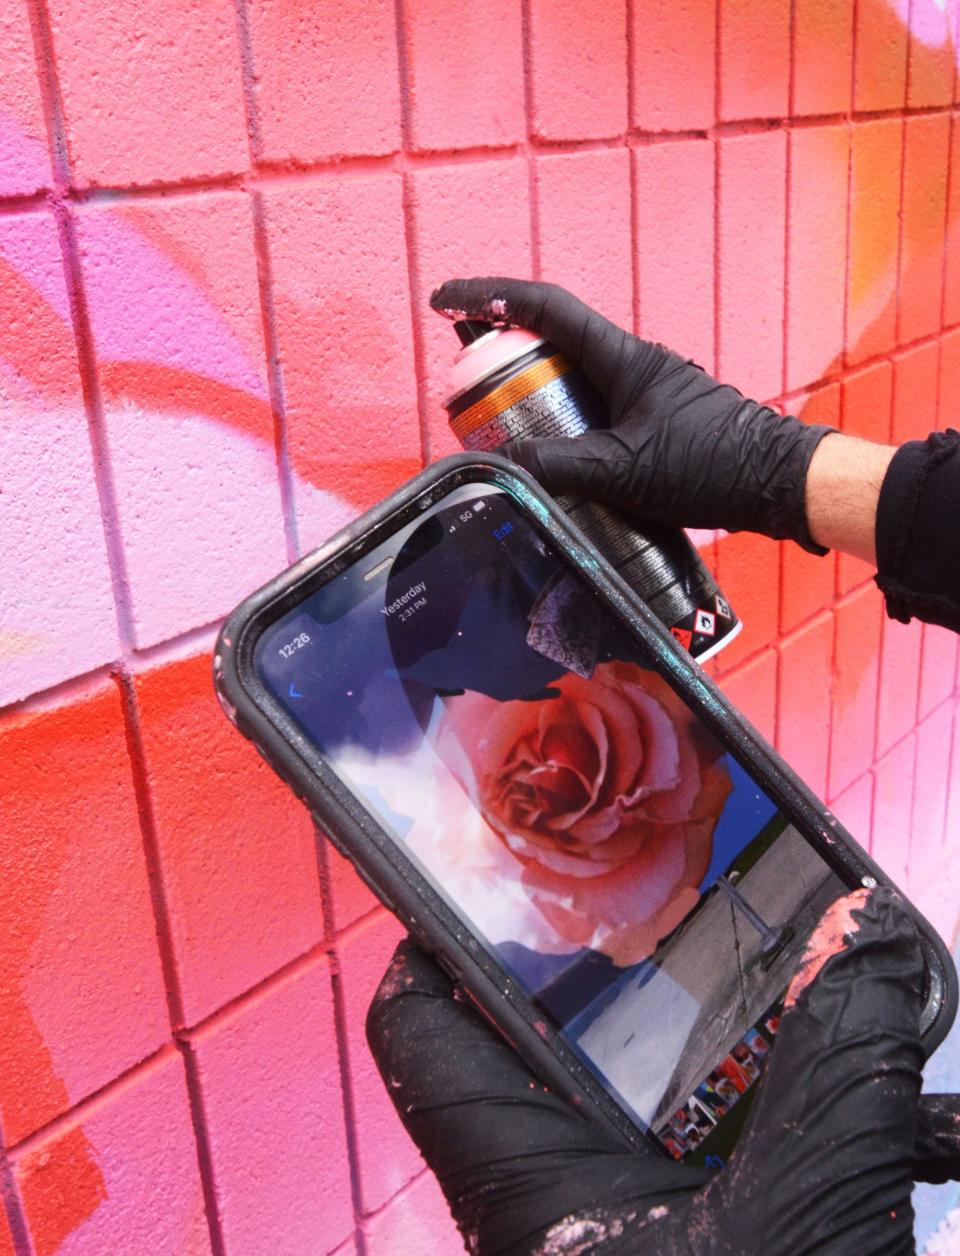 Mural artist Ben Keller uses a portion of the final rendition on his phone to paint a rose for his mural at Castle Church in downtown Norwich Friday.